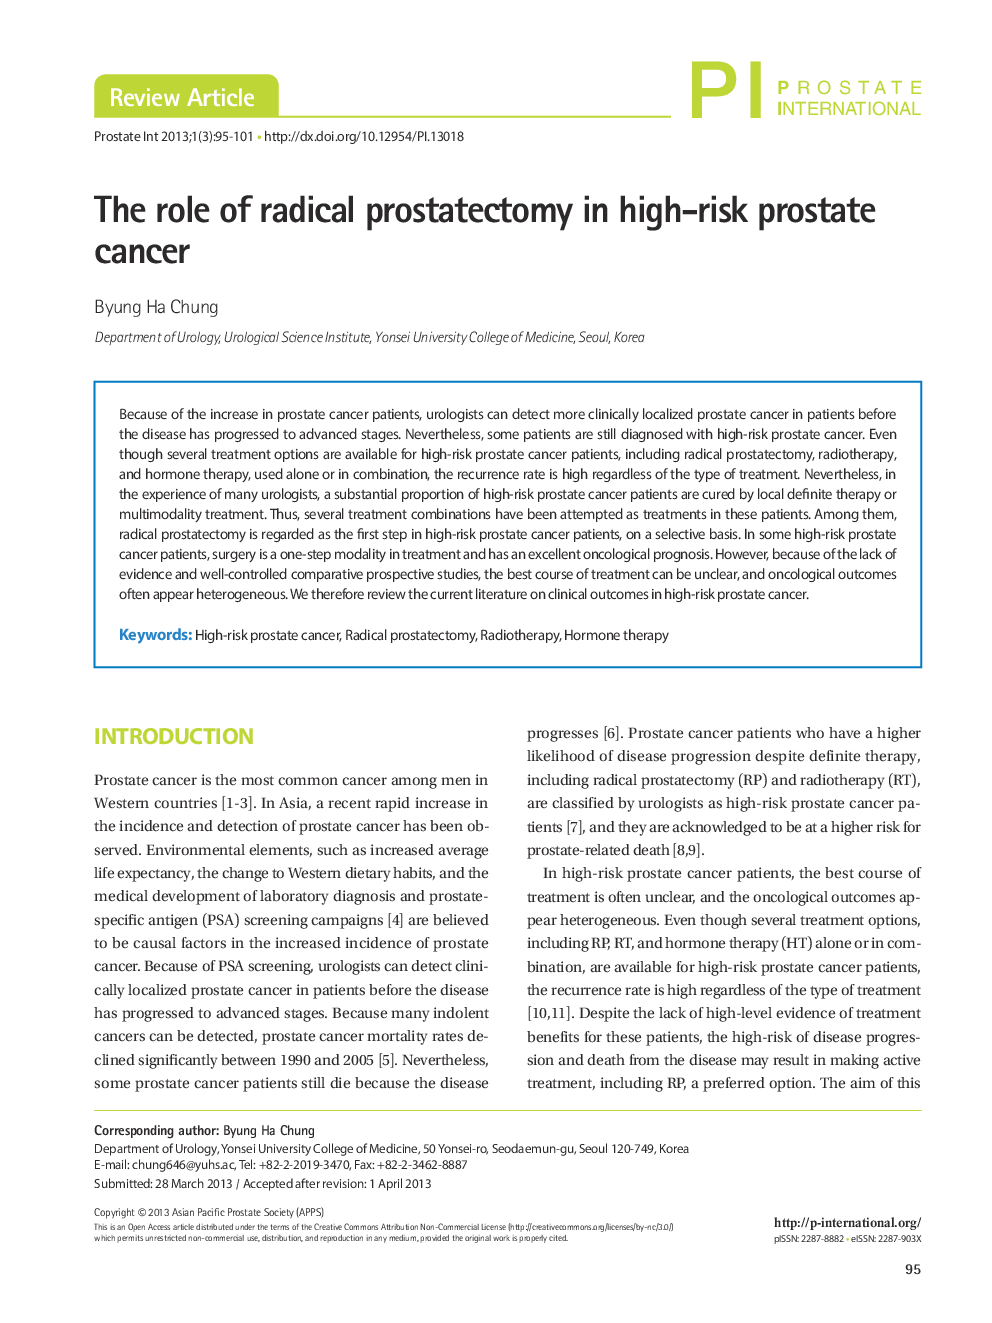 The role of radical prostatectomy in high-risk prostate cancer 